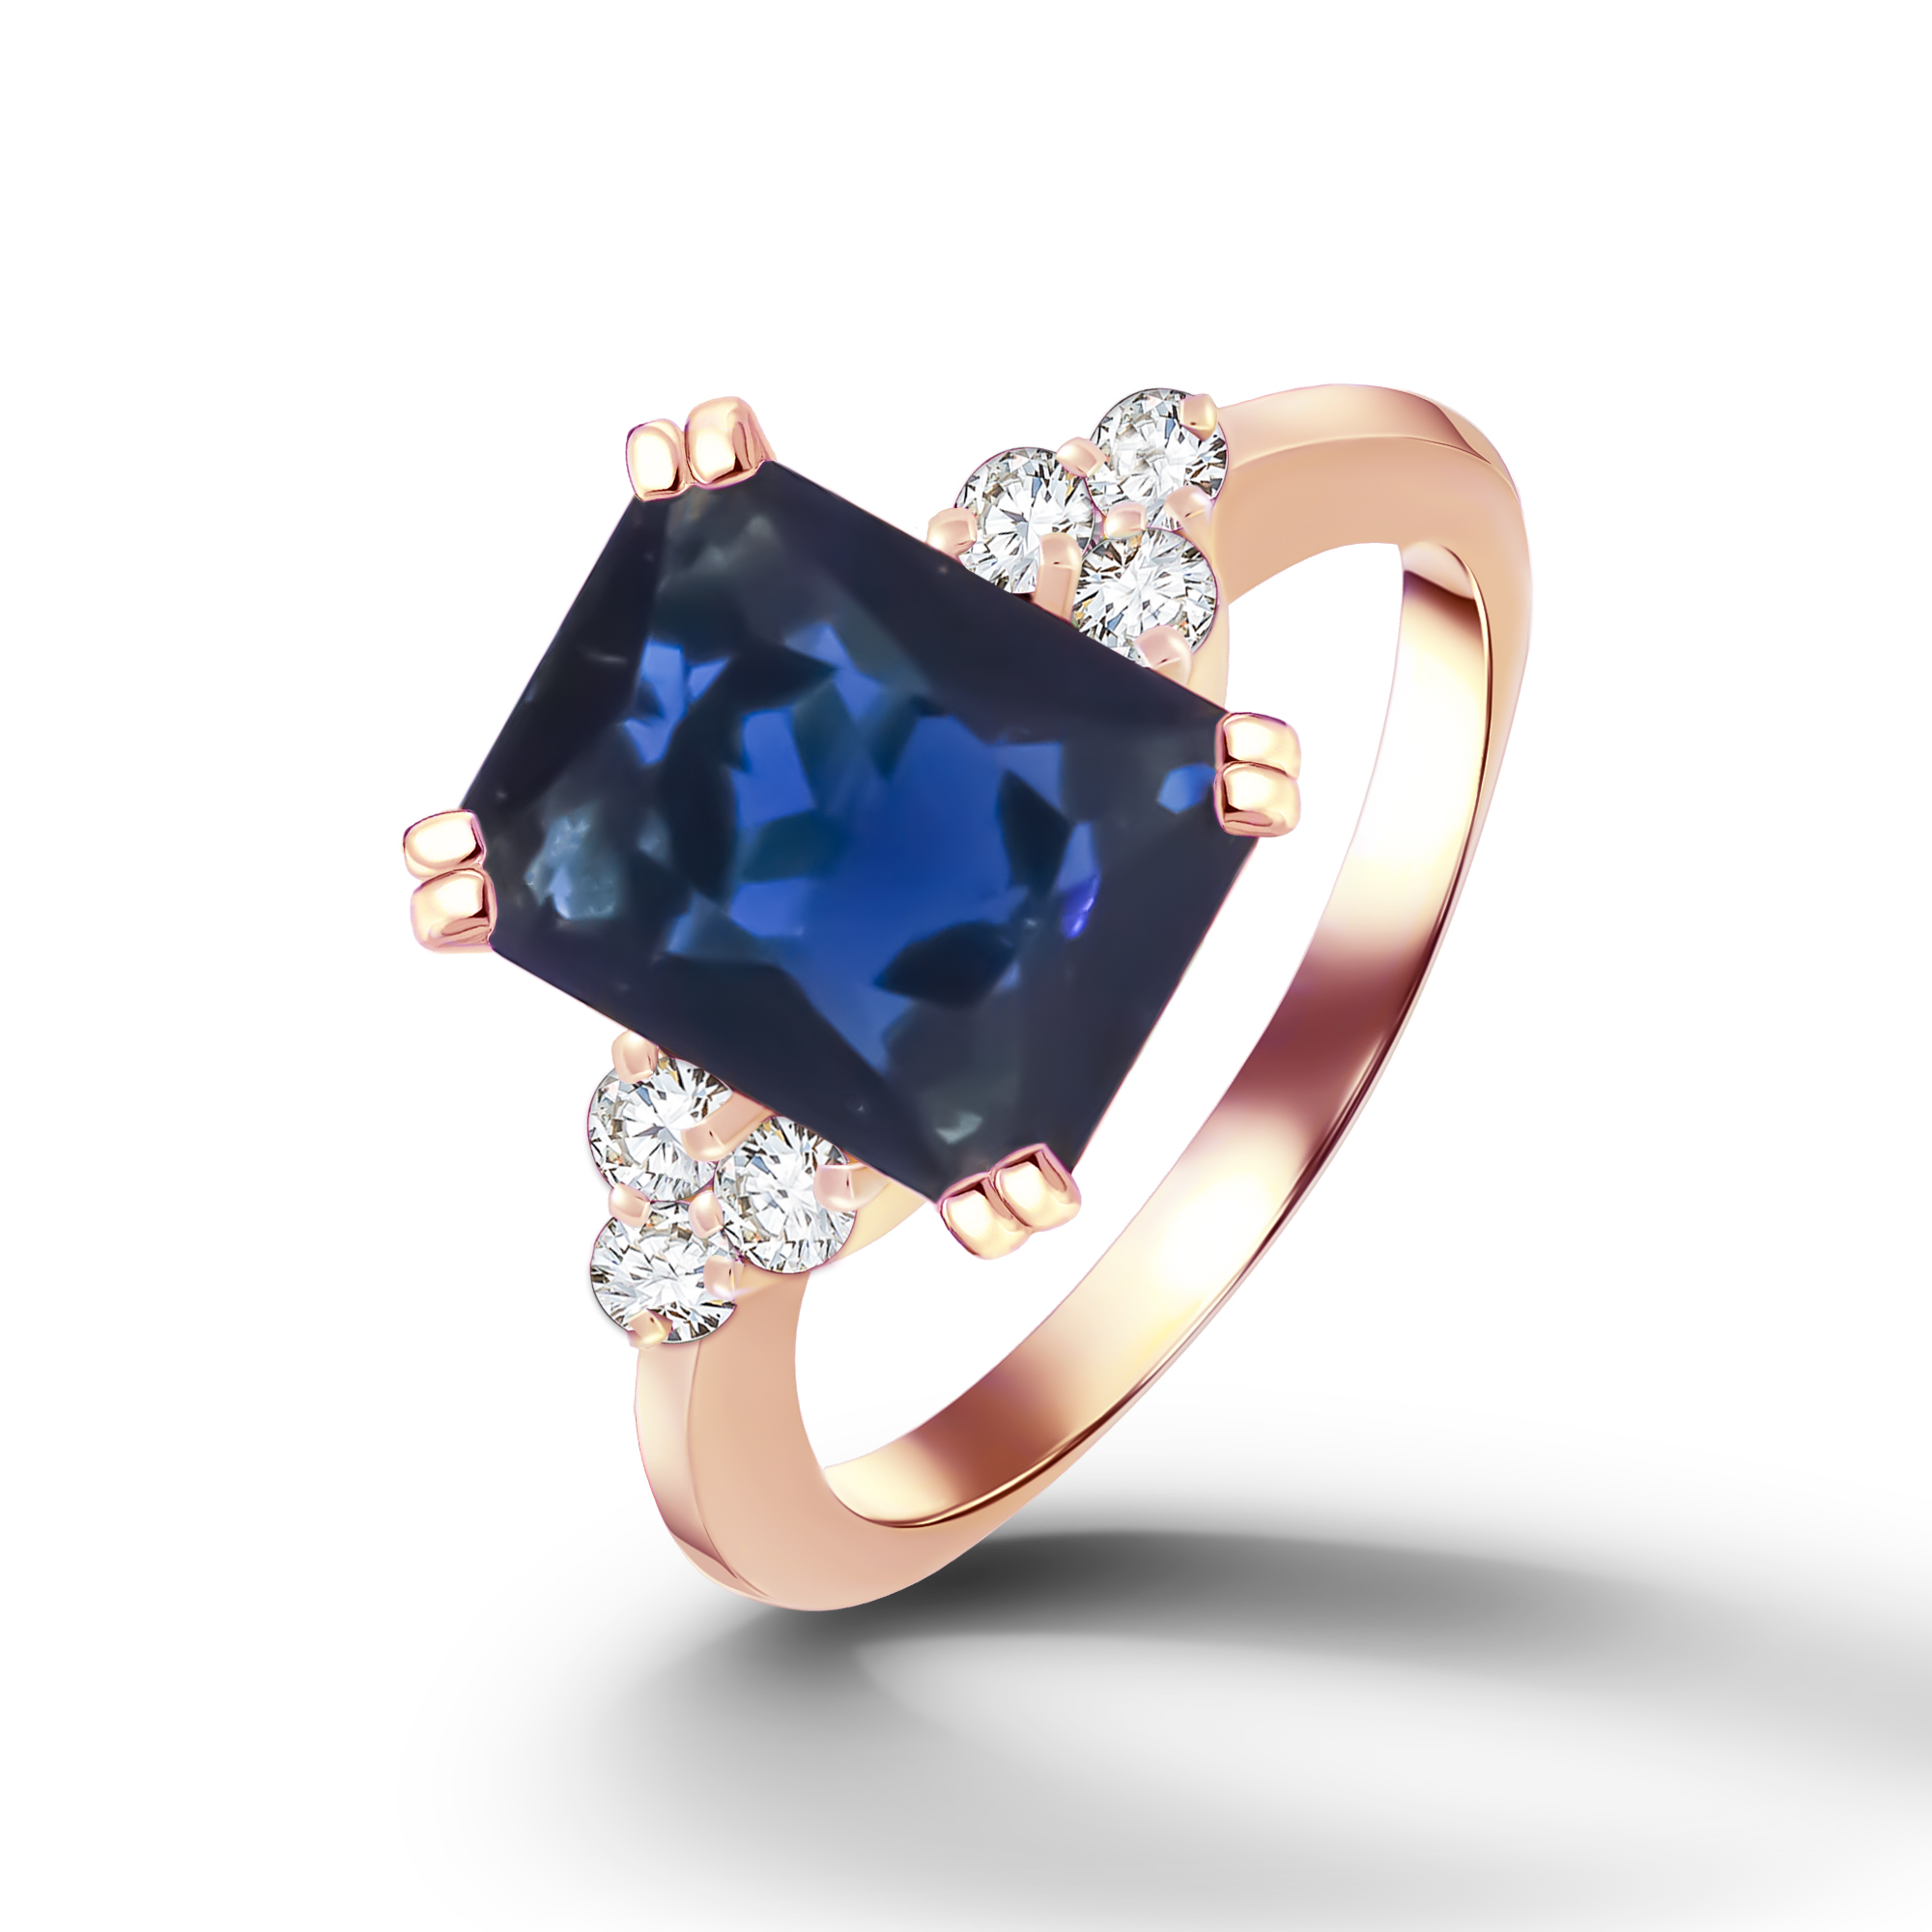 An absolute stunner, classic blue sapphire engagement ring with an emerald cut gemstone of your choice as it’s centre stone and with round cut clear quartz on the band to further accentuate it